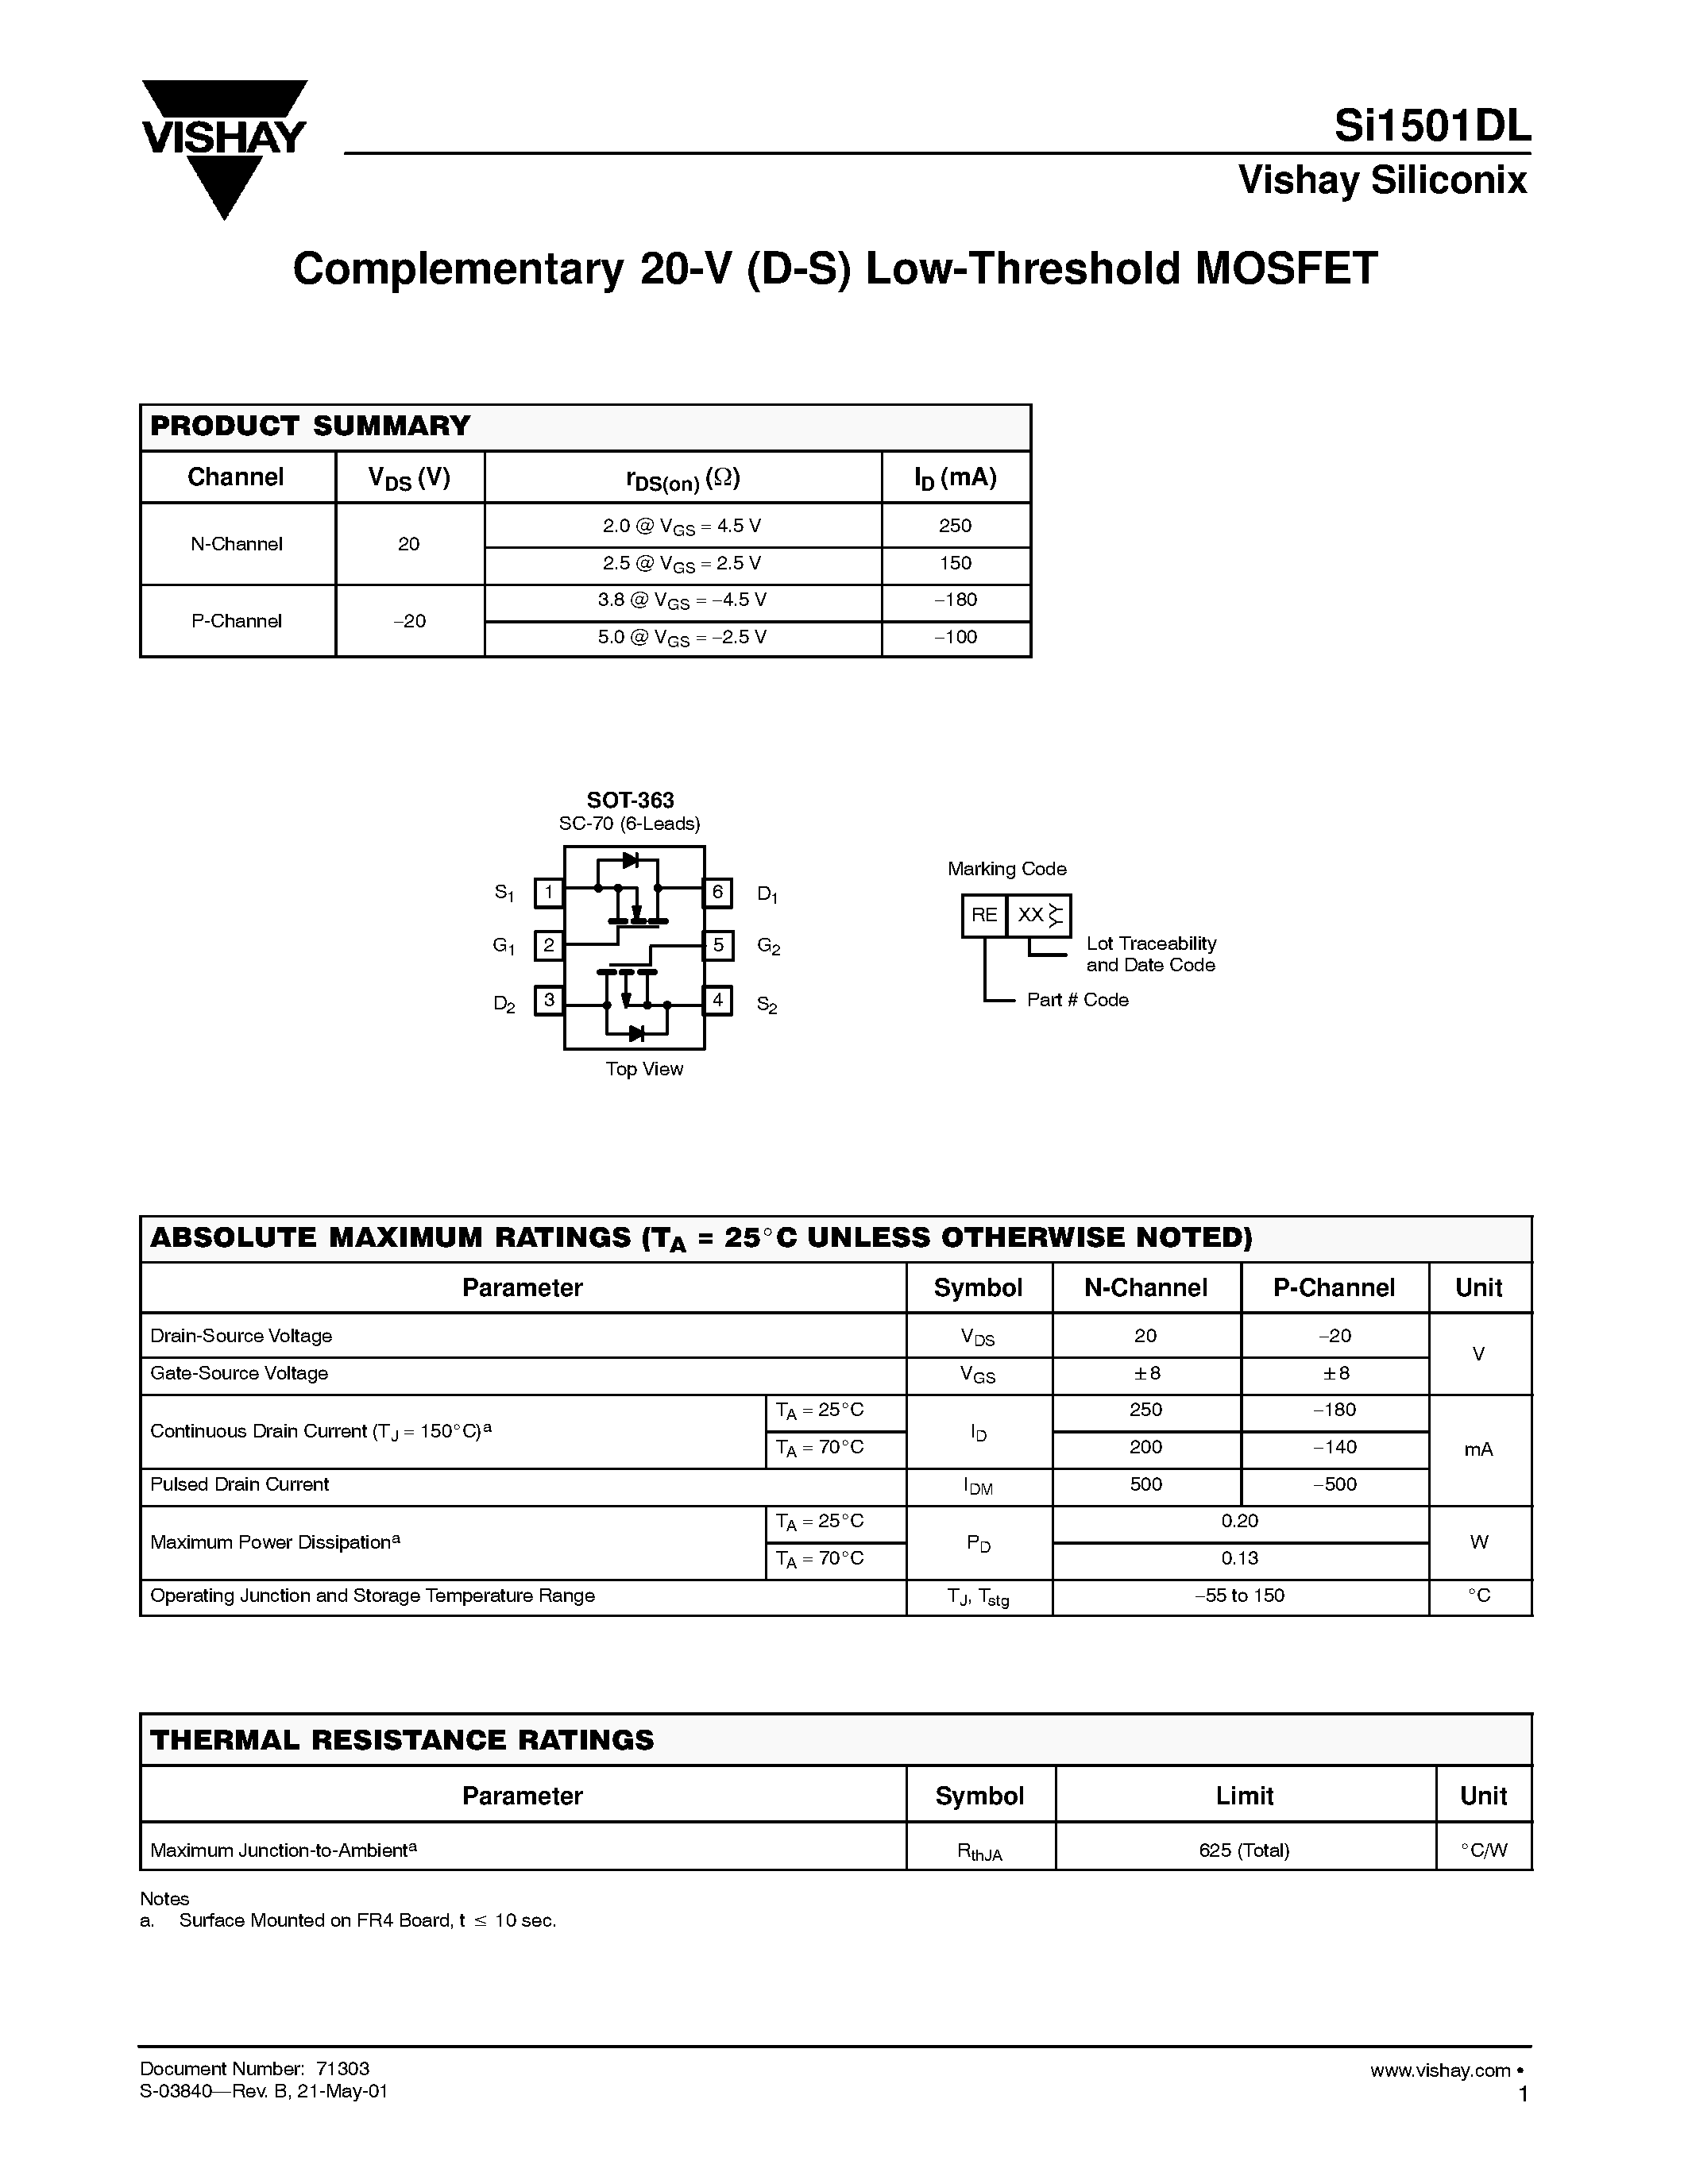 Даташит SI1501DL - Complementary 20-V (D-S) Low-Threshold MOSFET страница 1